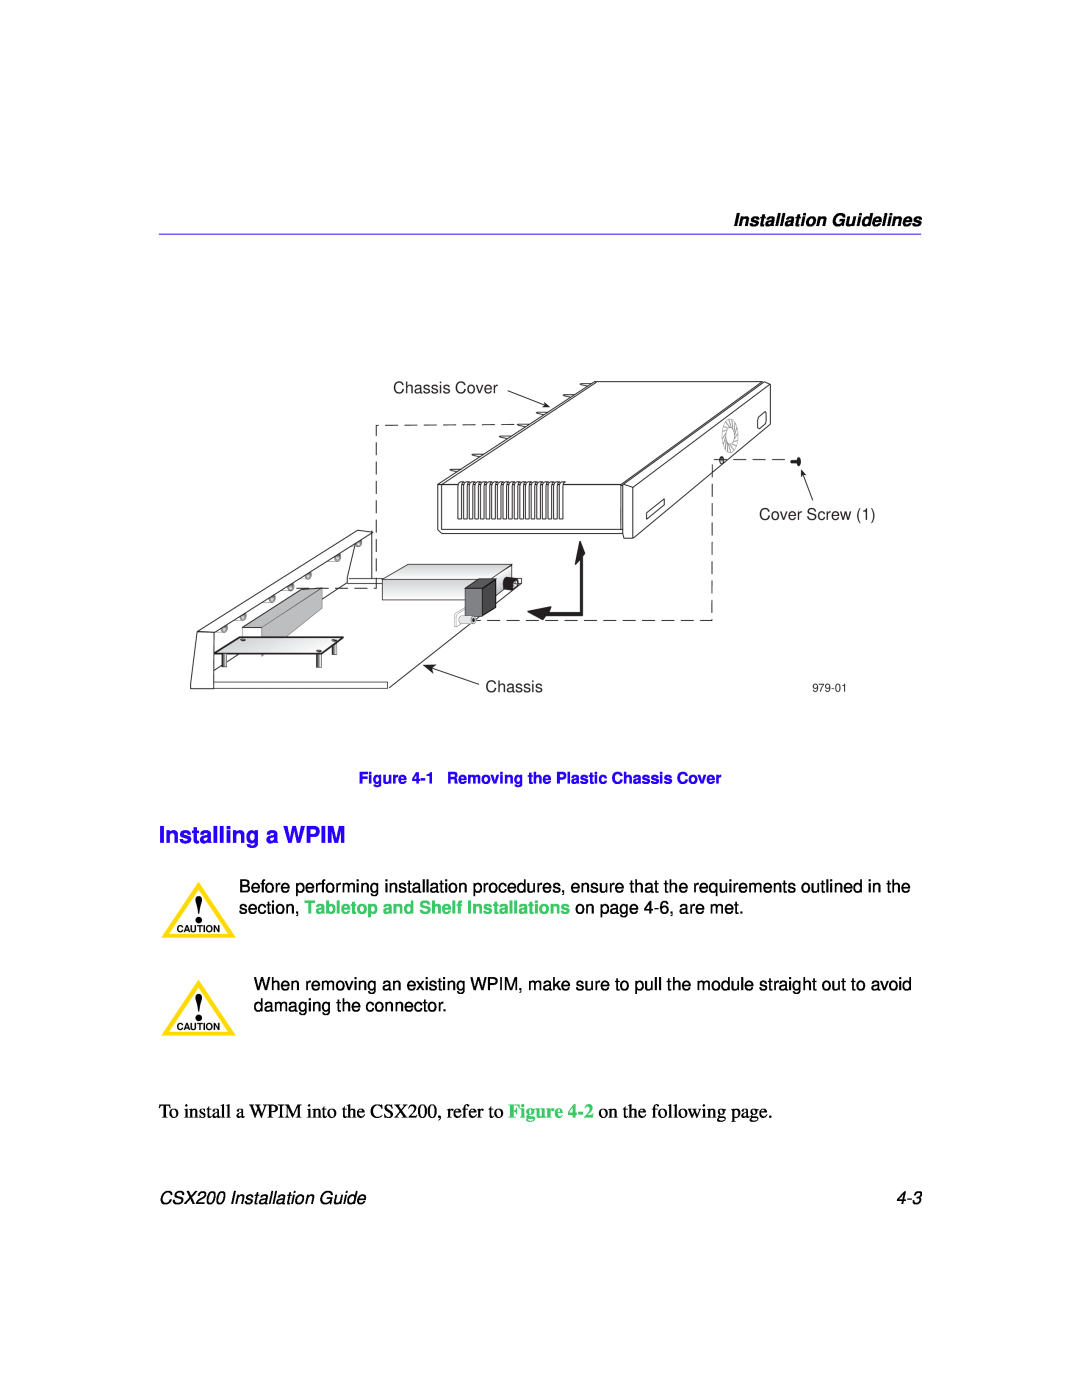 Cabletron Systems manual Installing a WPIM, Installation Guidelines, CSX200 Installation Guide 